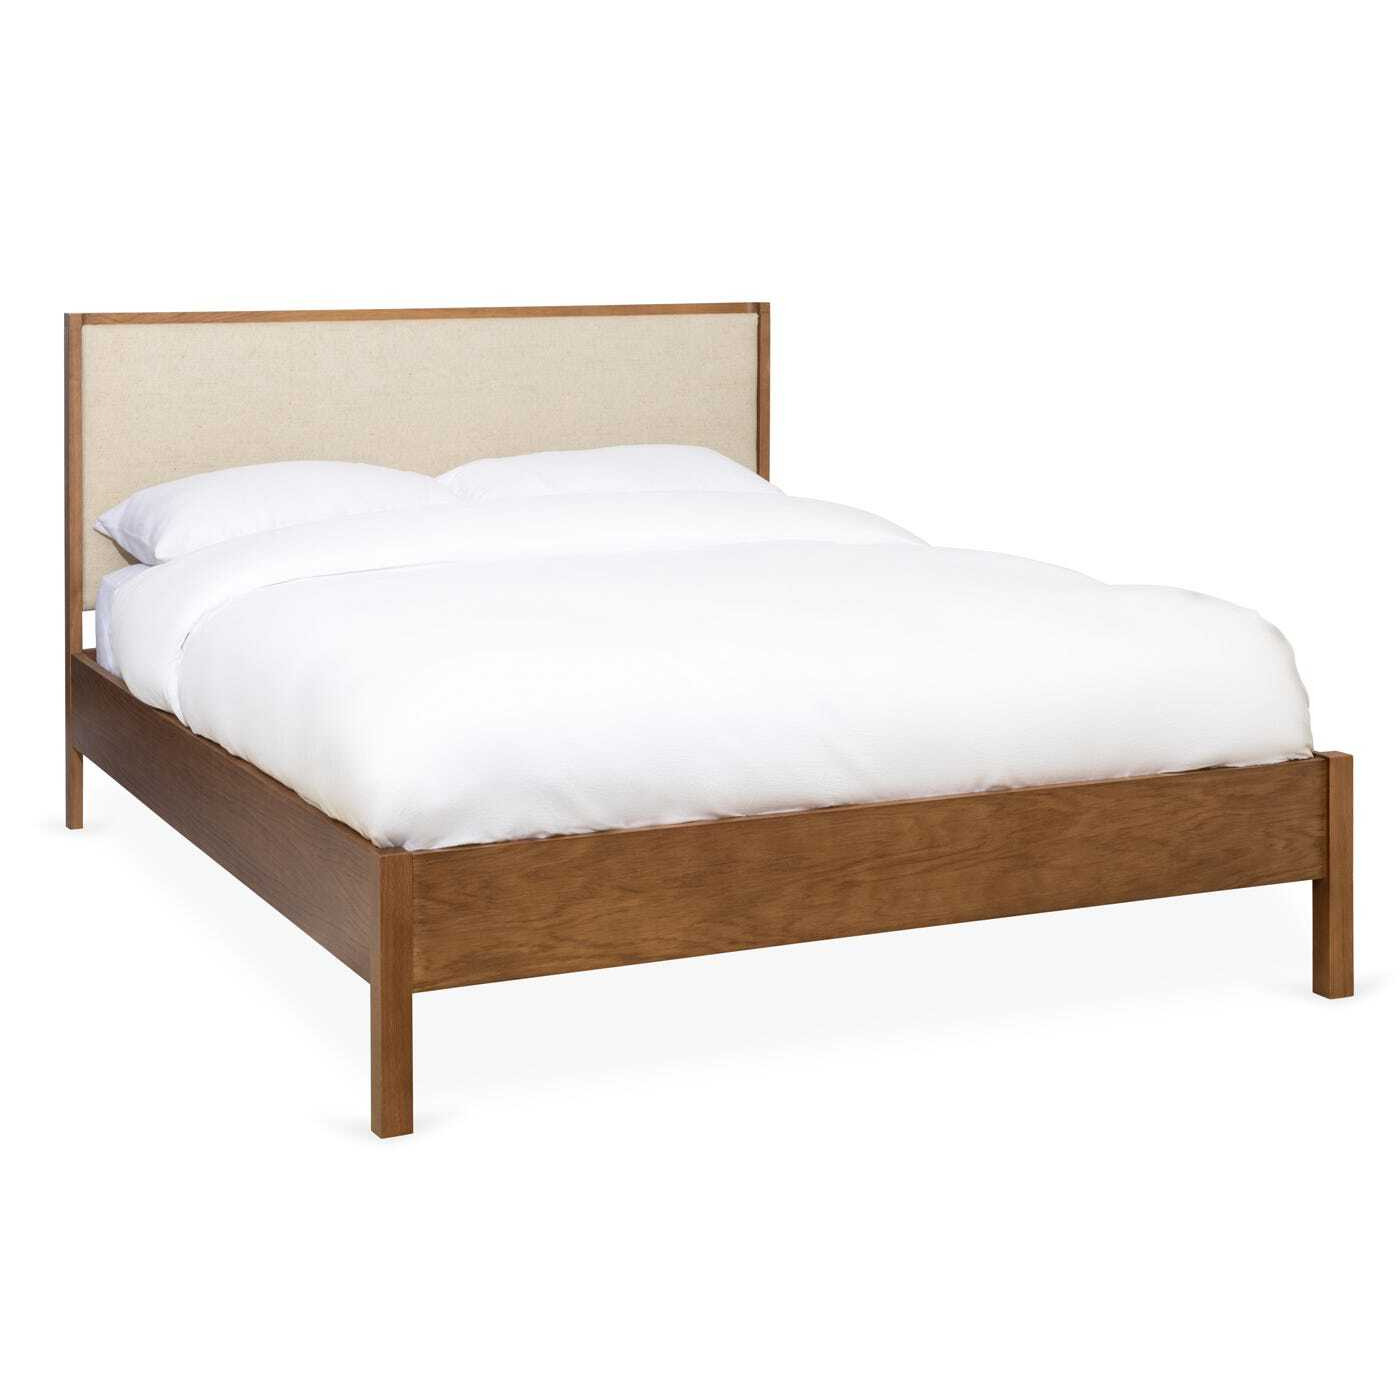 Heal's Marna King Size Bed - image 1